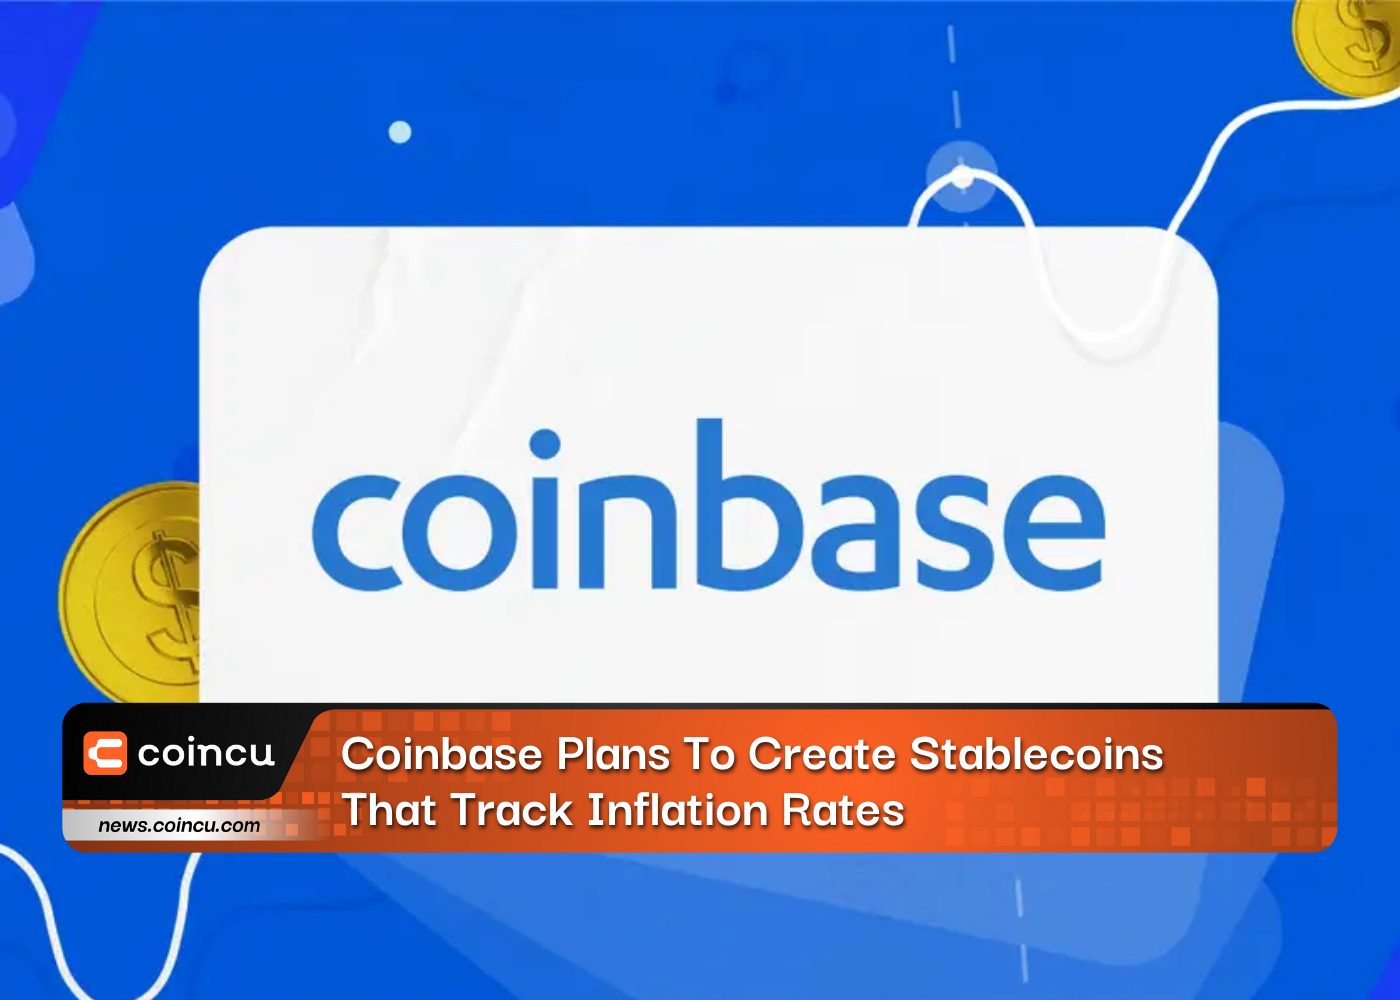 Coinbase Plans To Create Stablecoins That Track Inflation Rates